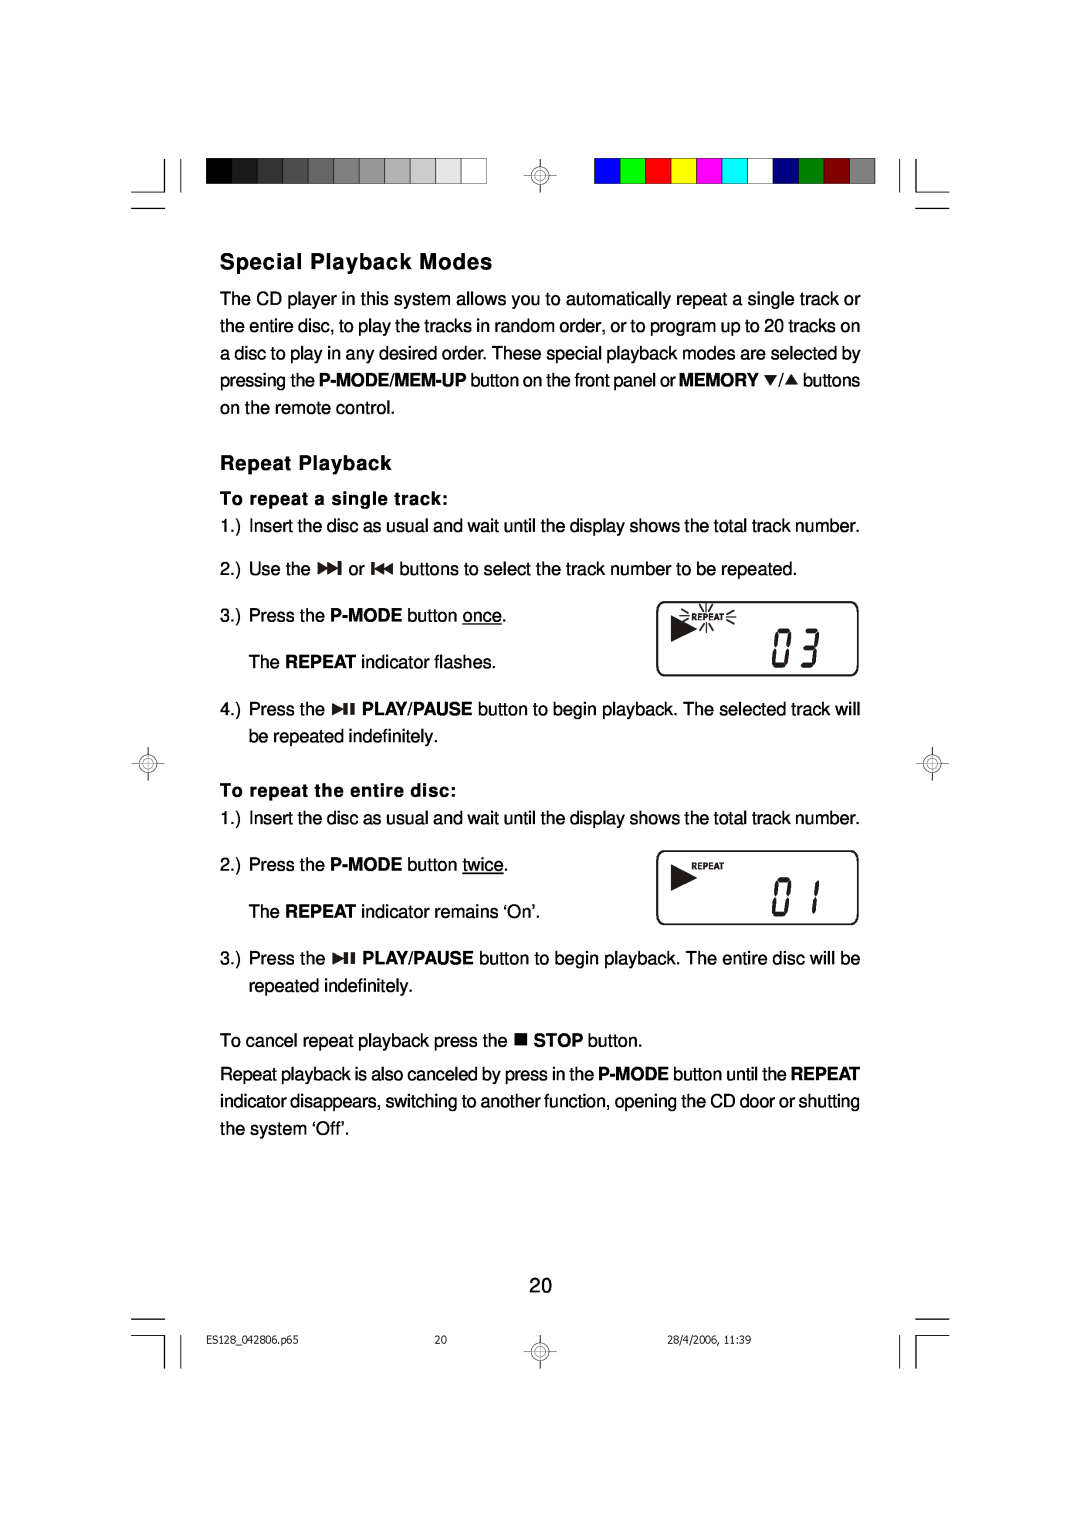 Emerson ES128 owner manual Special Playback Modes, Repeat Playback 